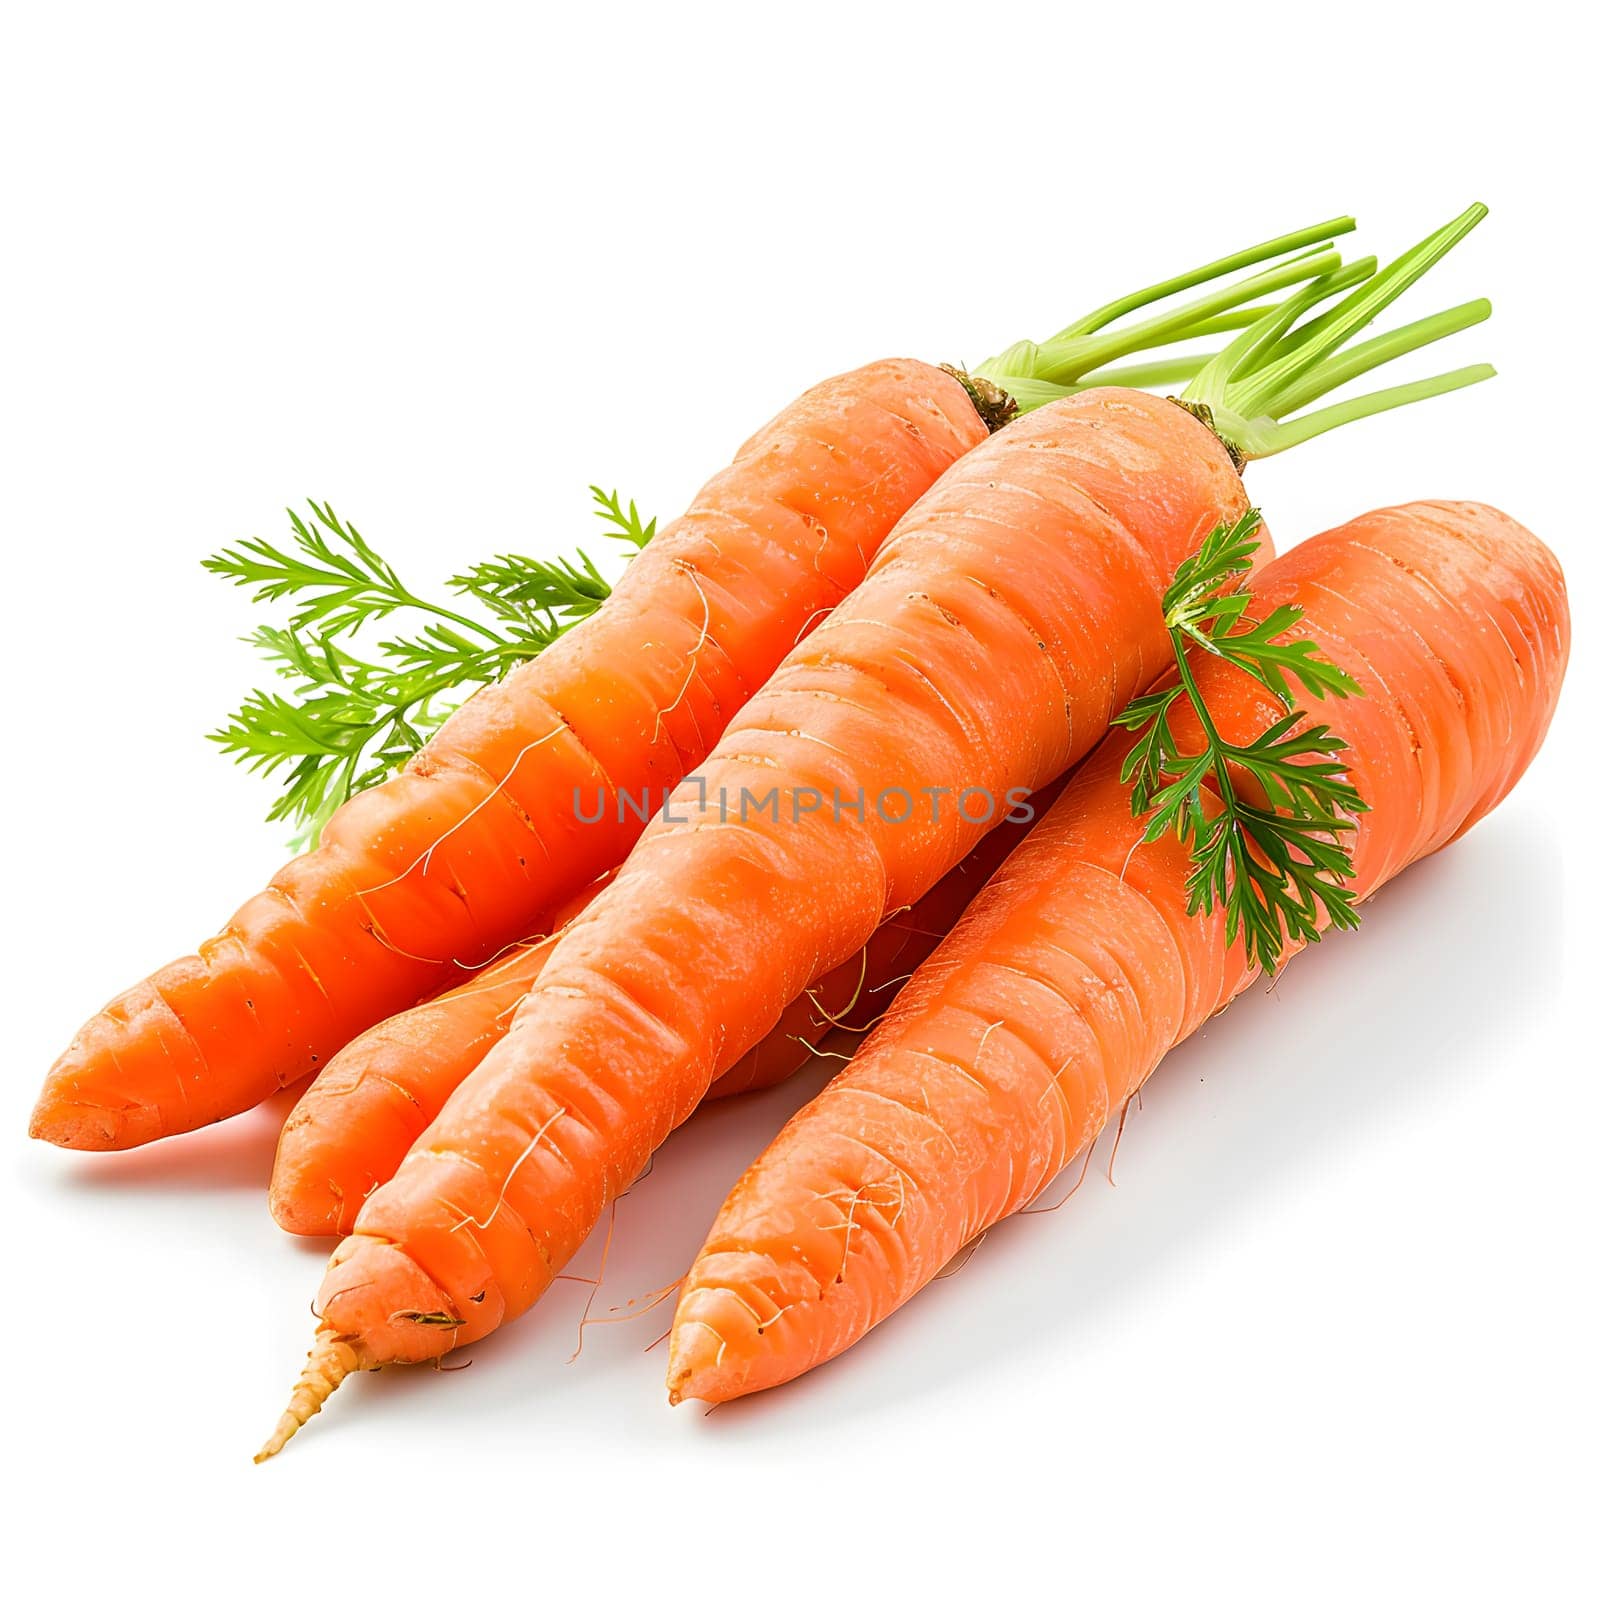 Food Three carrots, a root vegetable, with green stems on a white background by Nadtochiy